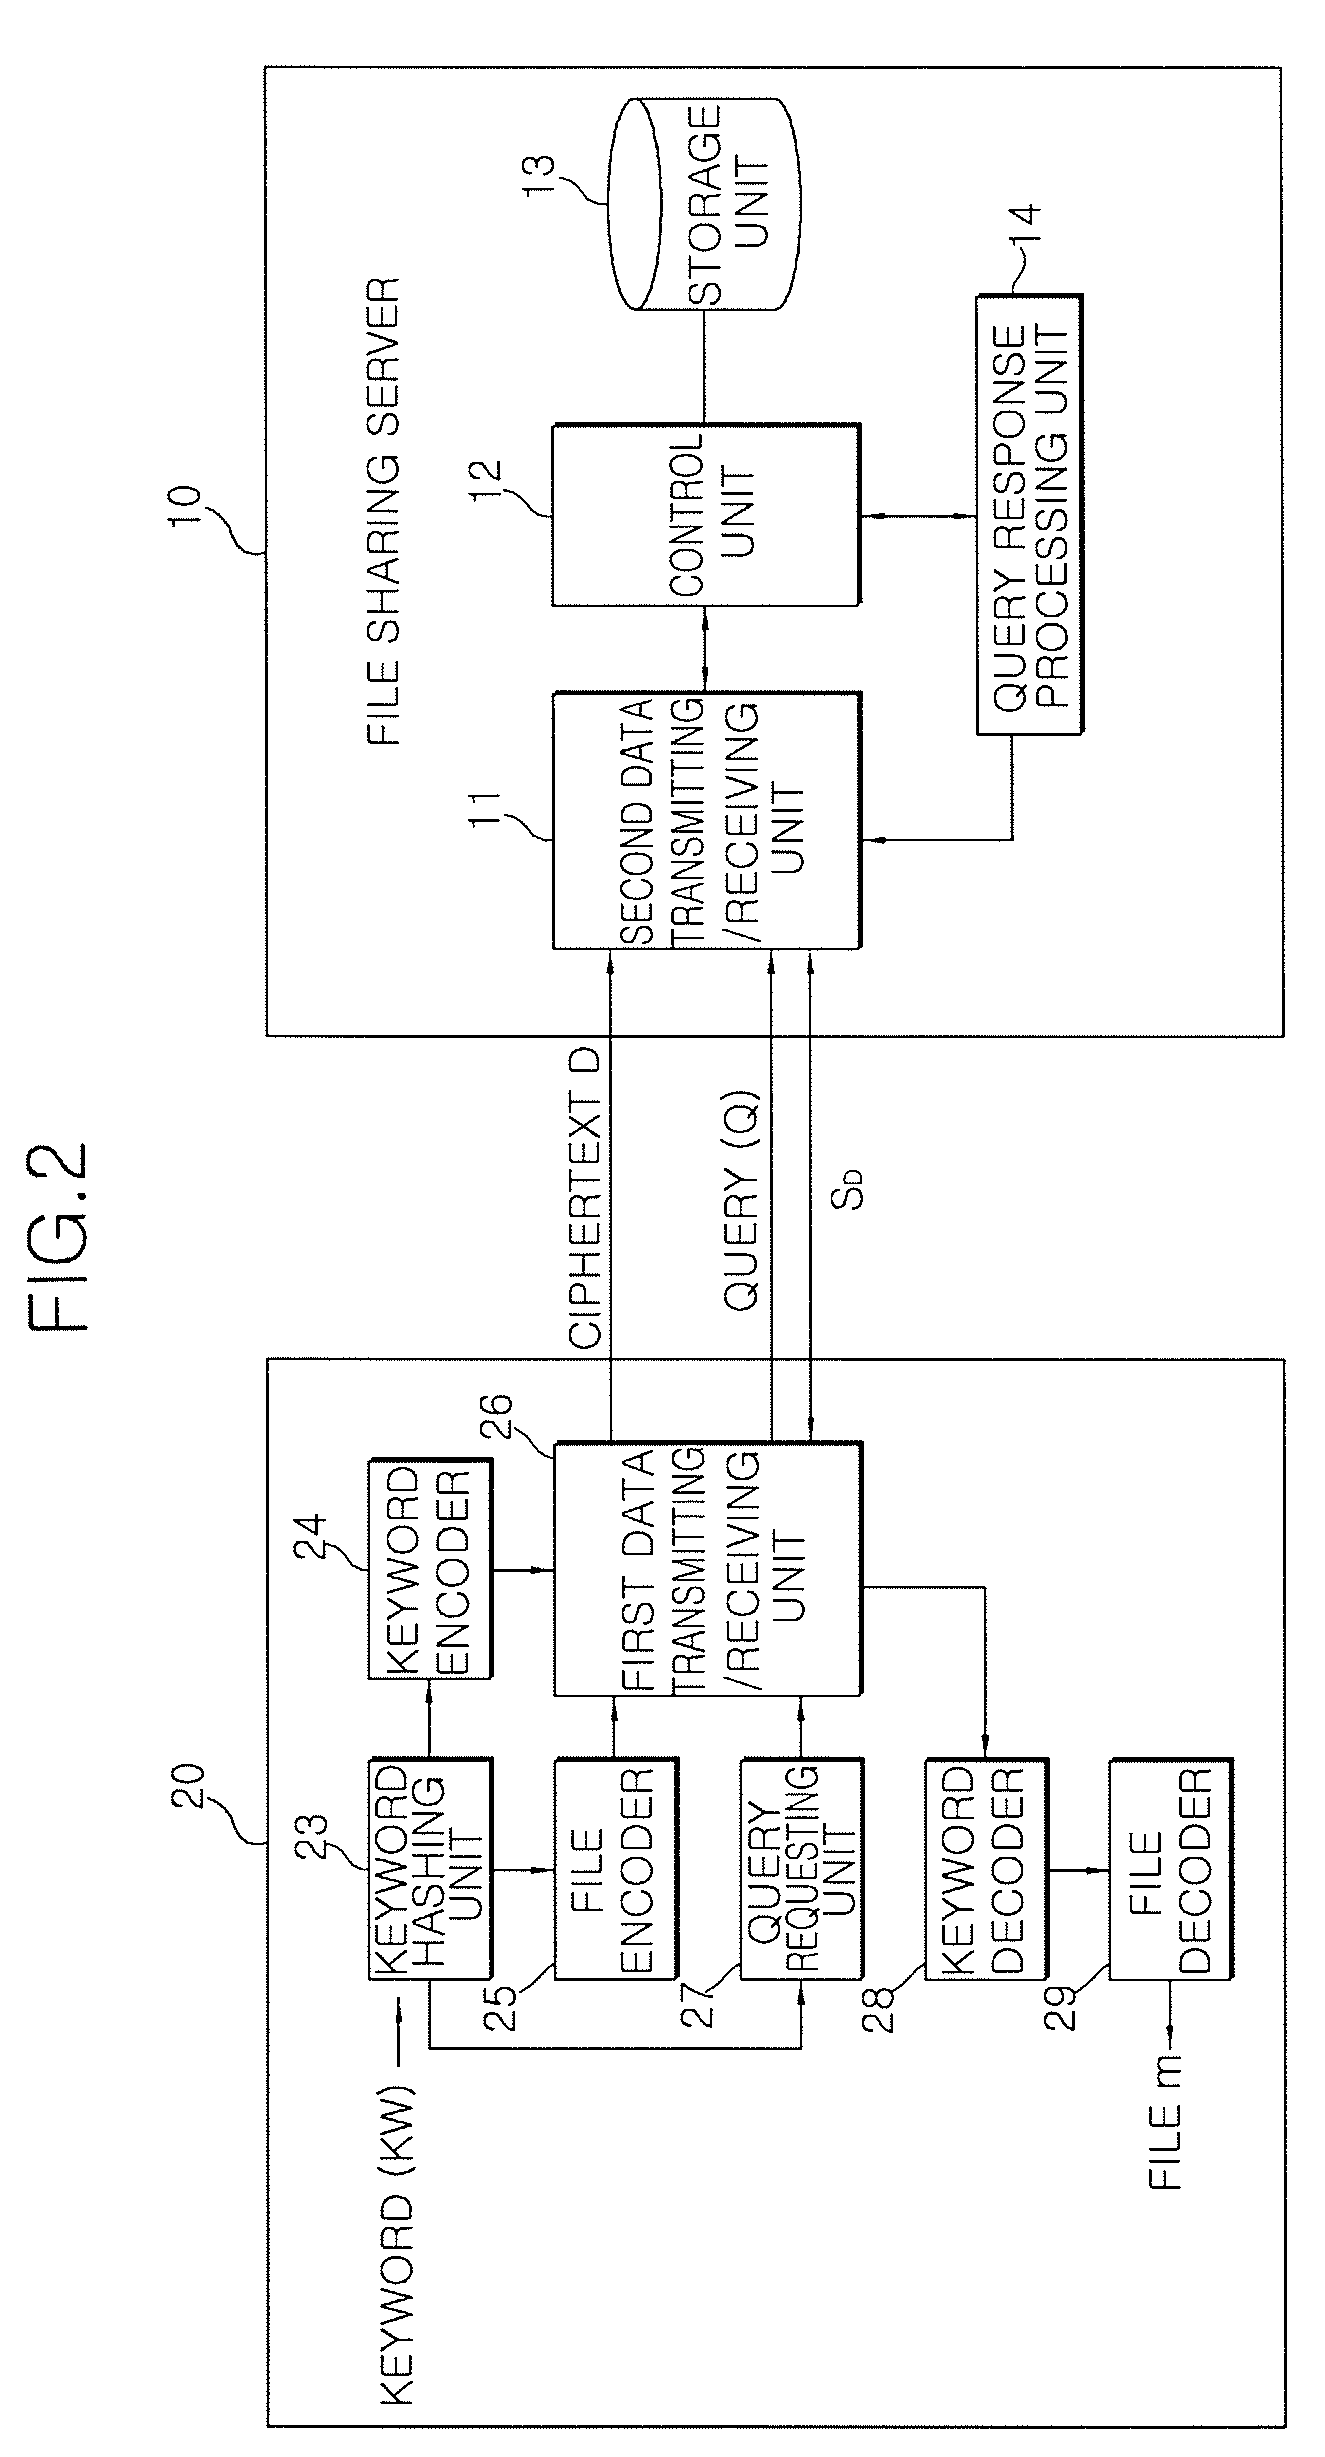 File sharing method and system using encryption and decryption